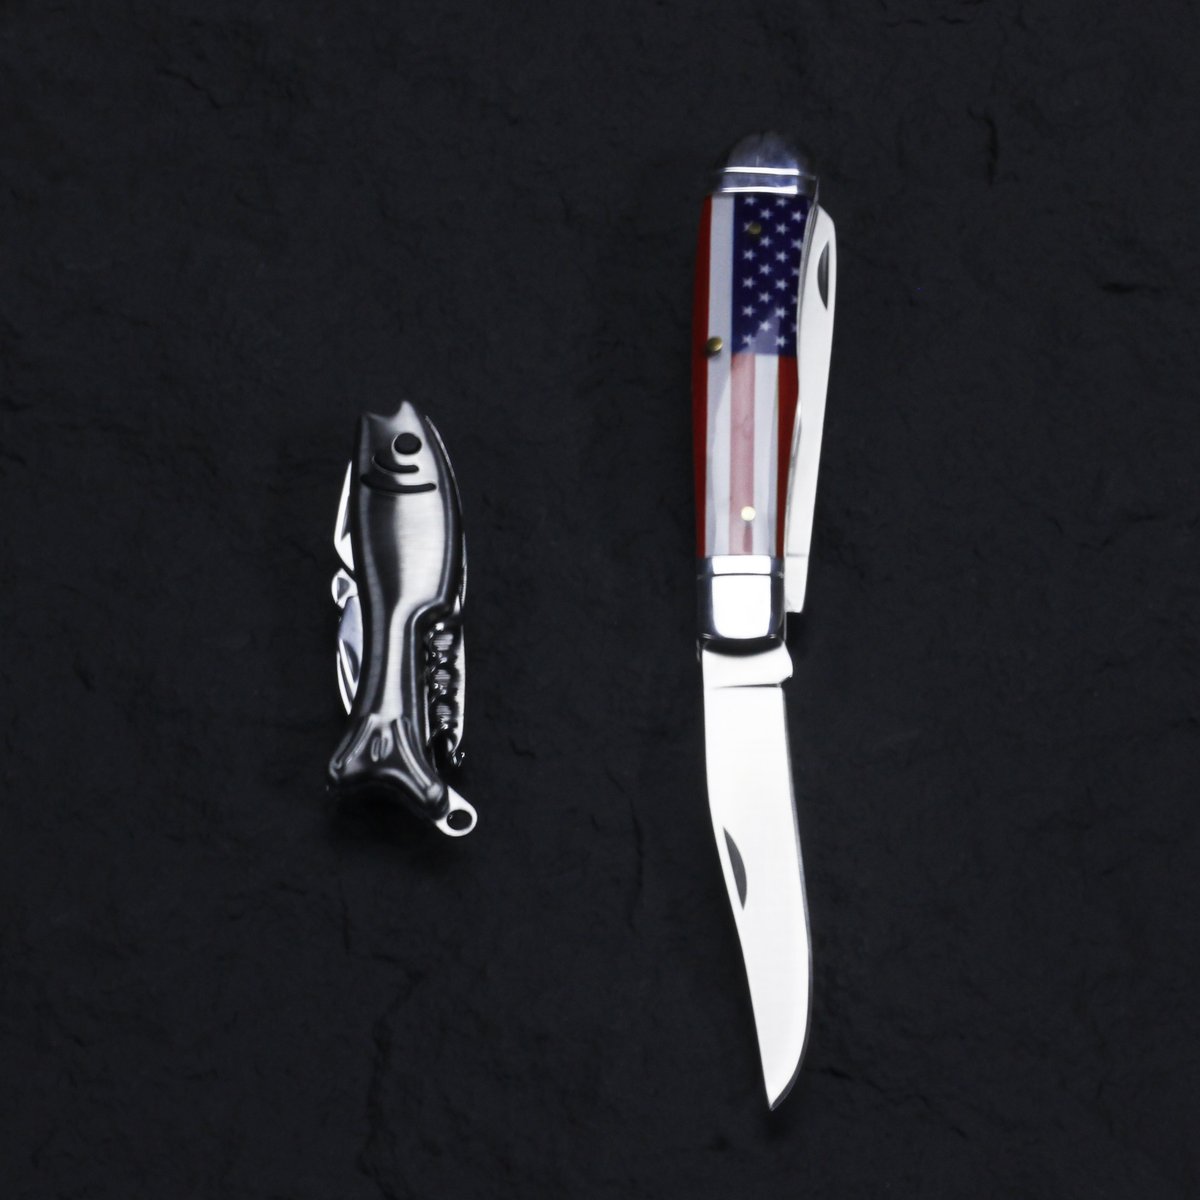 Level up your outdoor gear with our brand new D2 stainless steel folding knife. Sleek, sturdy, and styled with dyed bone handles for that extra flair. 🌟 

#yousunlong #sunlong #UpgradeYourAdventure #D2Durability